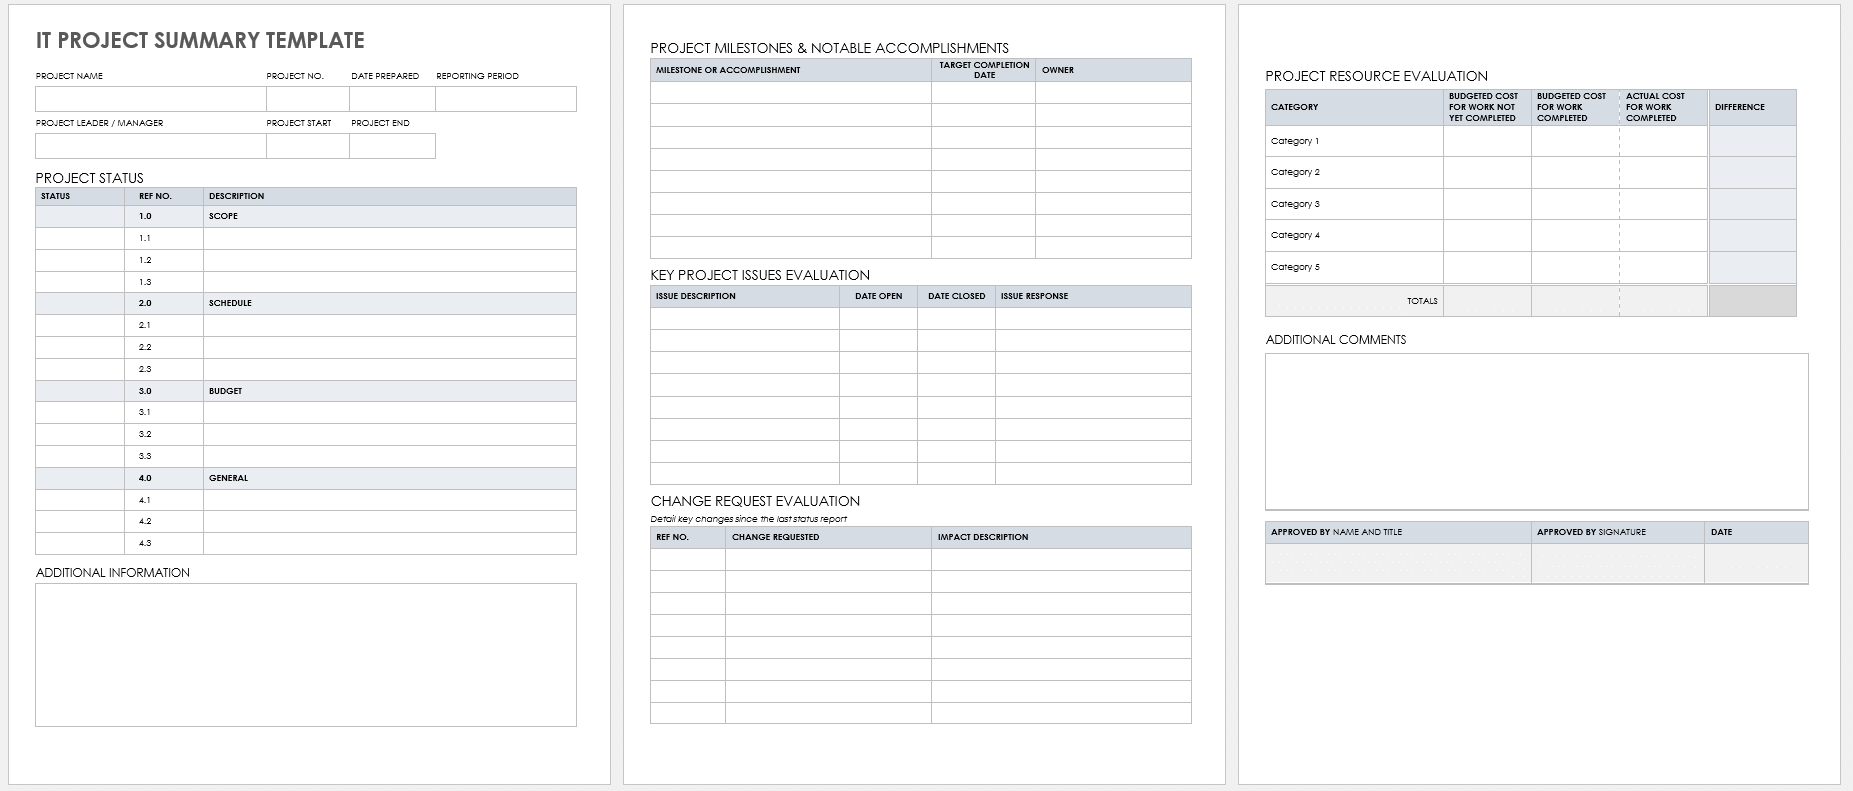 IT Project Summary Template